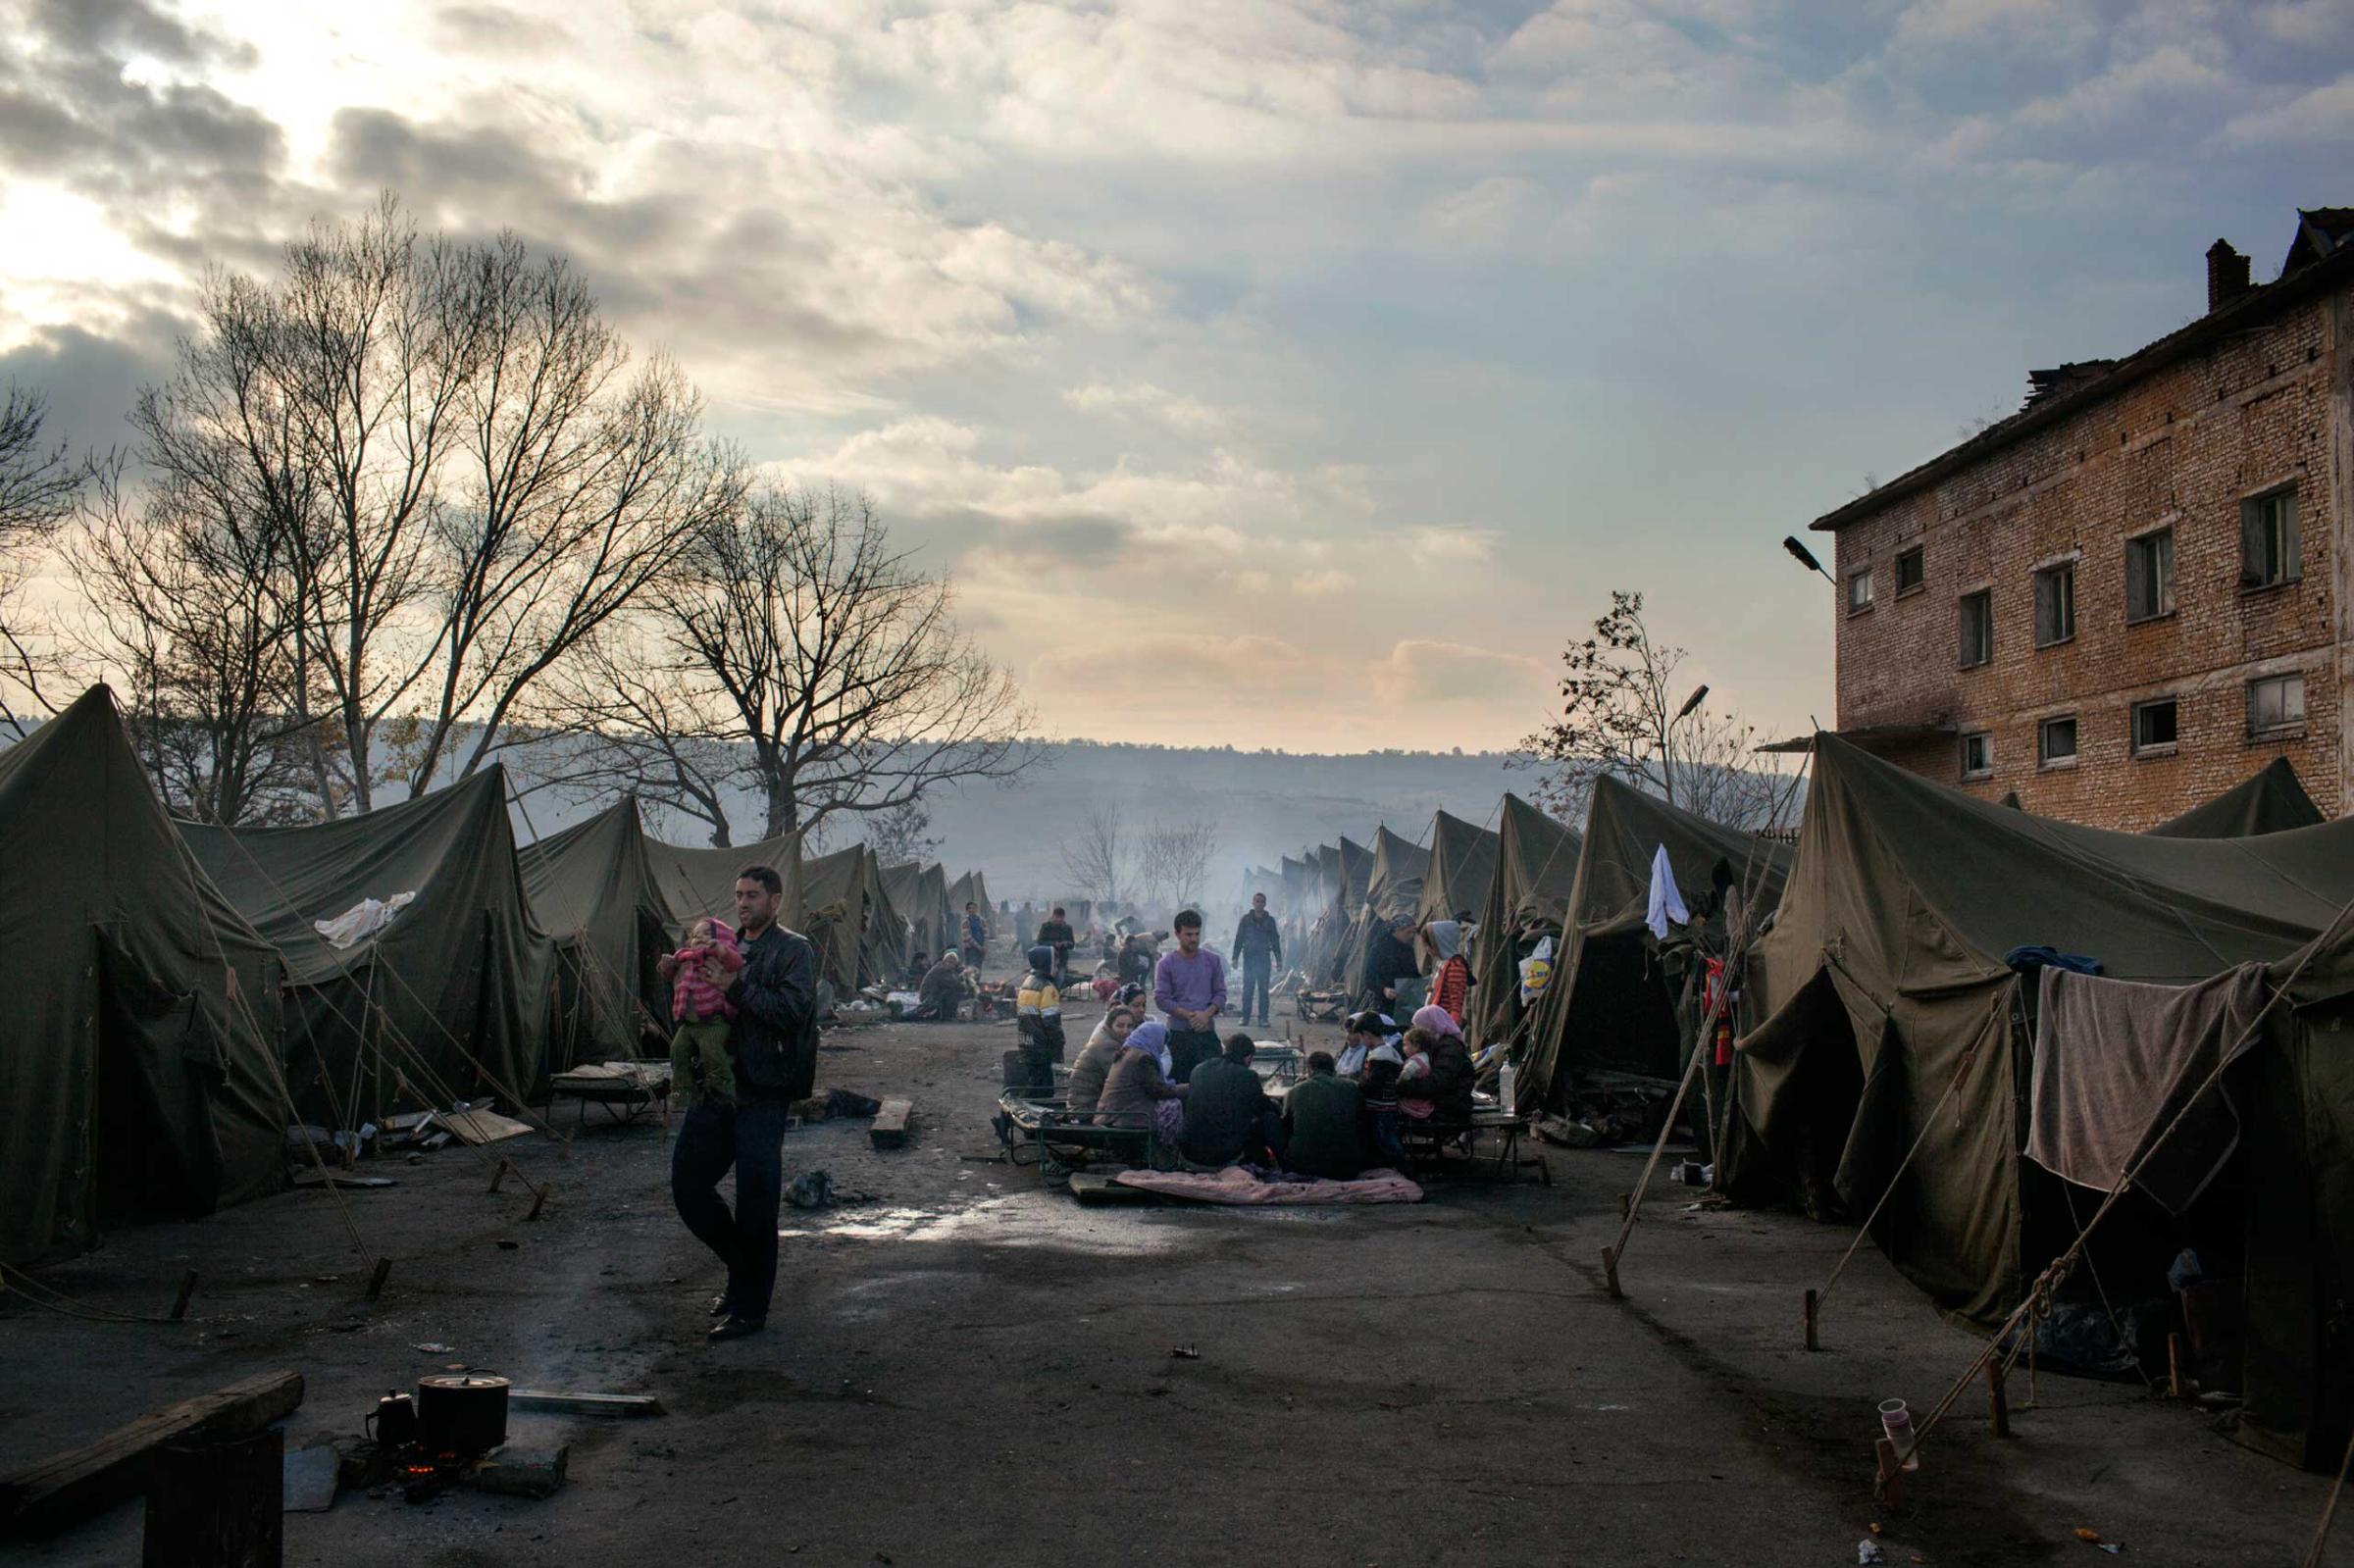 A camp for Syrian refugees in Harmanli, Bulgaria near the Turkish border, where approximately 1,000 asylum-seekers were housed on a former military base in tents, containers and a dilapidated building. The tents were not heated and the occupants slept either on thin mattresses or on old foldable beds, with four toilets serving the whole camp. Harmanli, Bulgaria, Nov. 19, 2013.